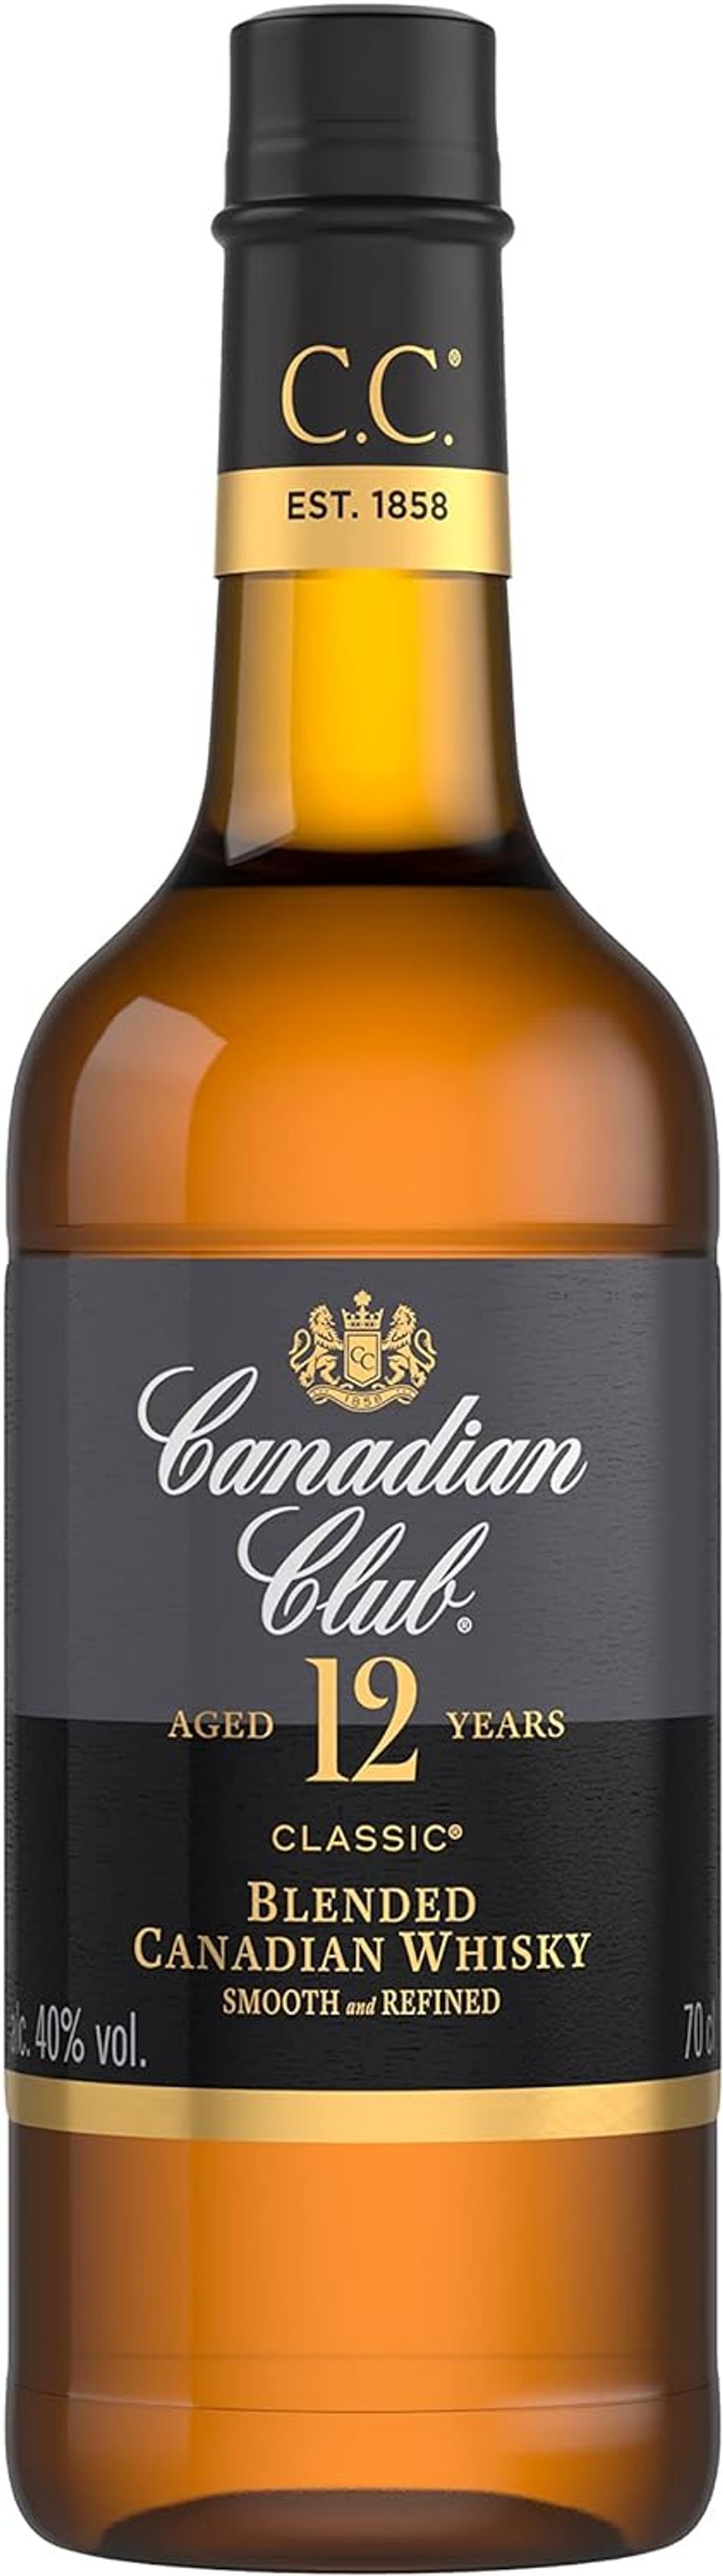 Canadian Club 12 Jahre Classic Canadian Blended Whisky, 0,7l, alc. 40 Vol.-%